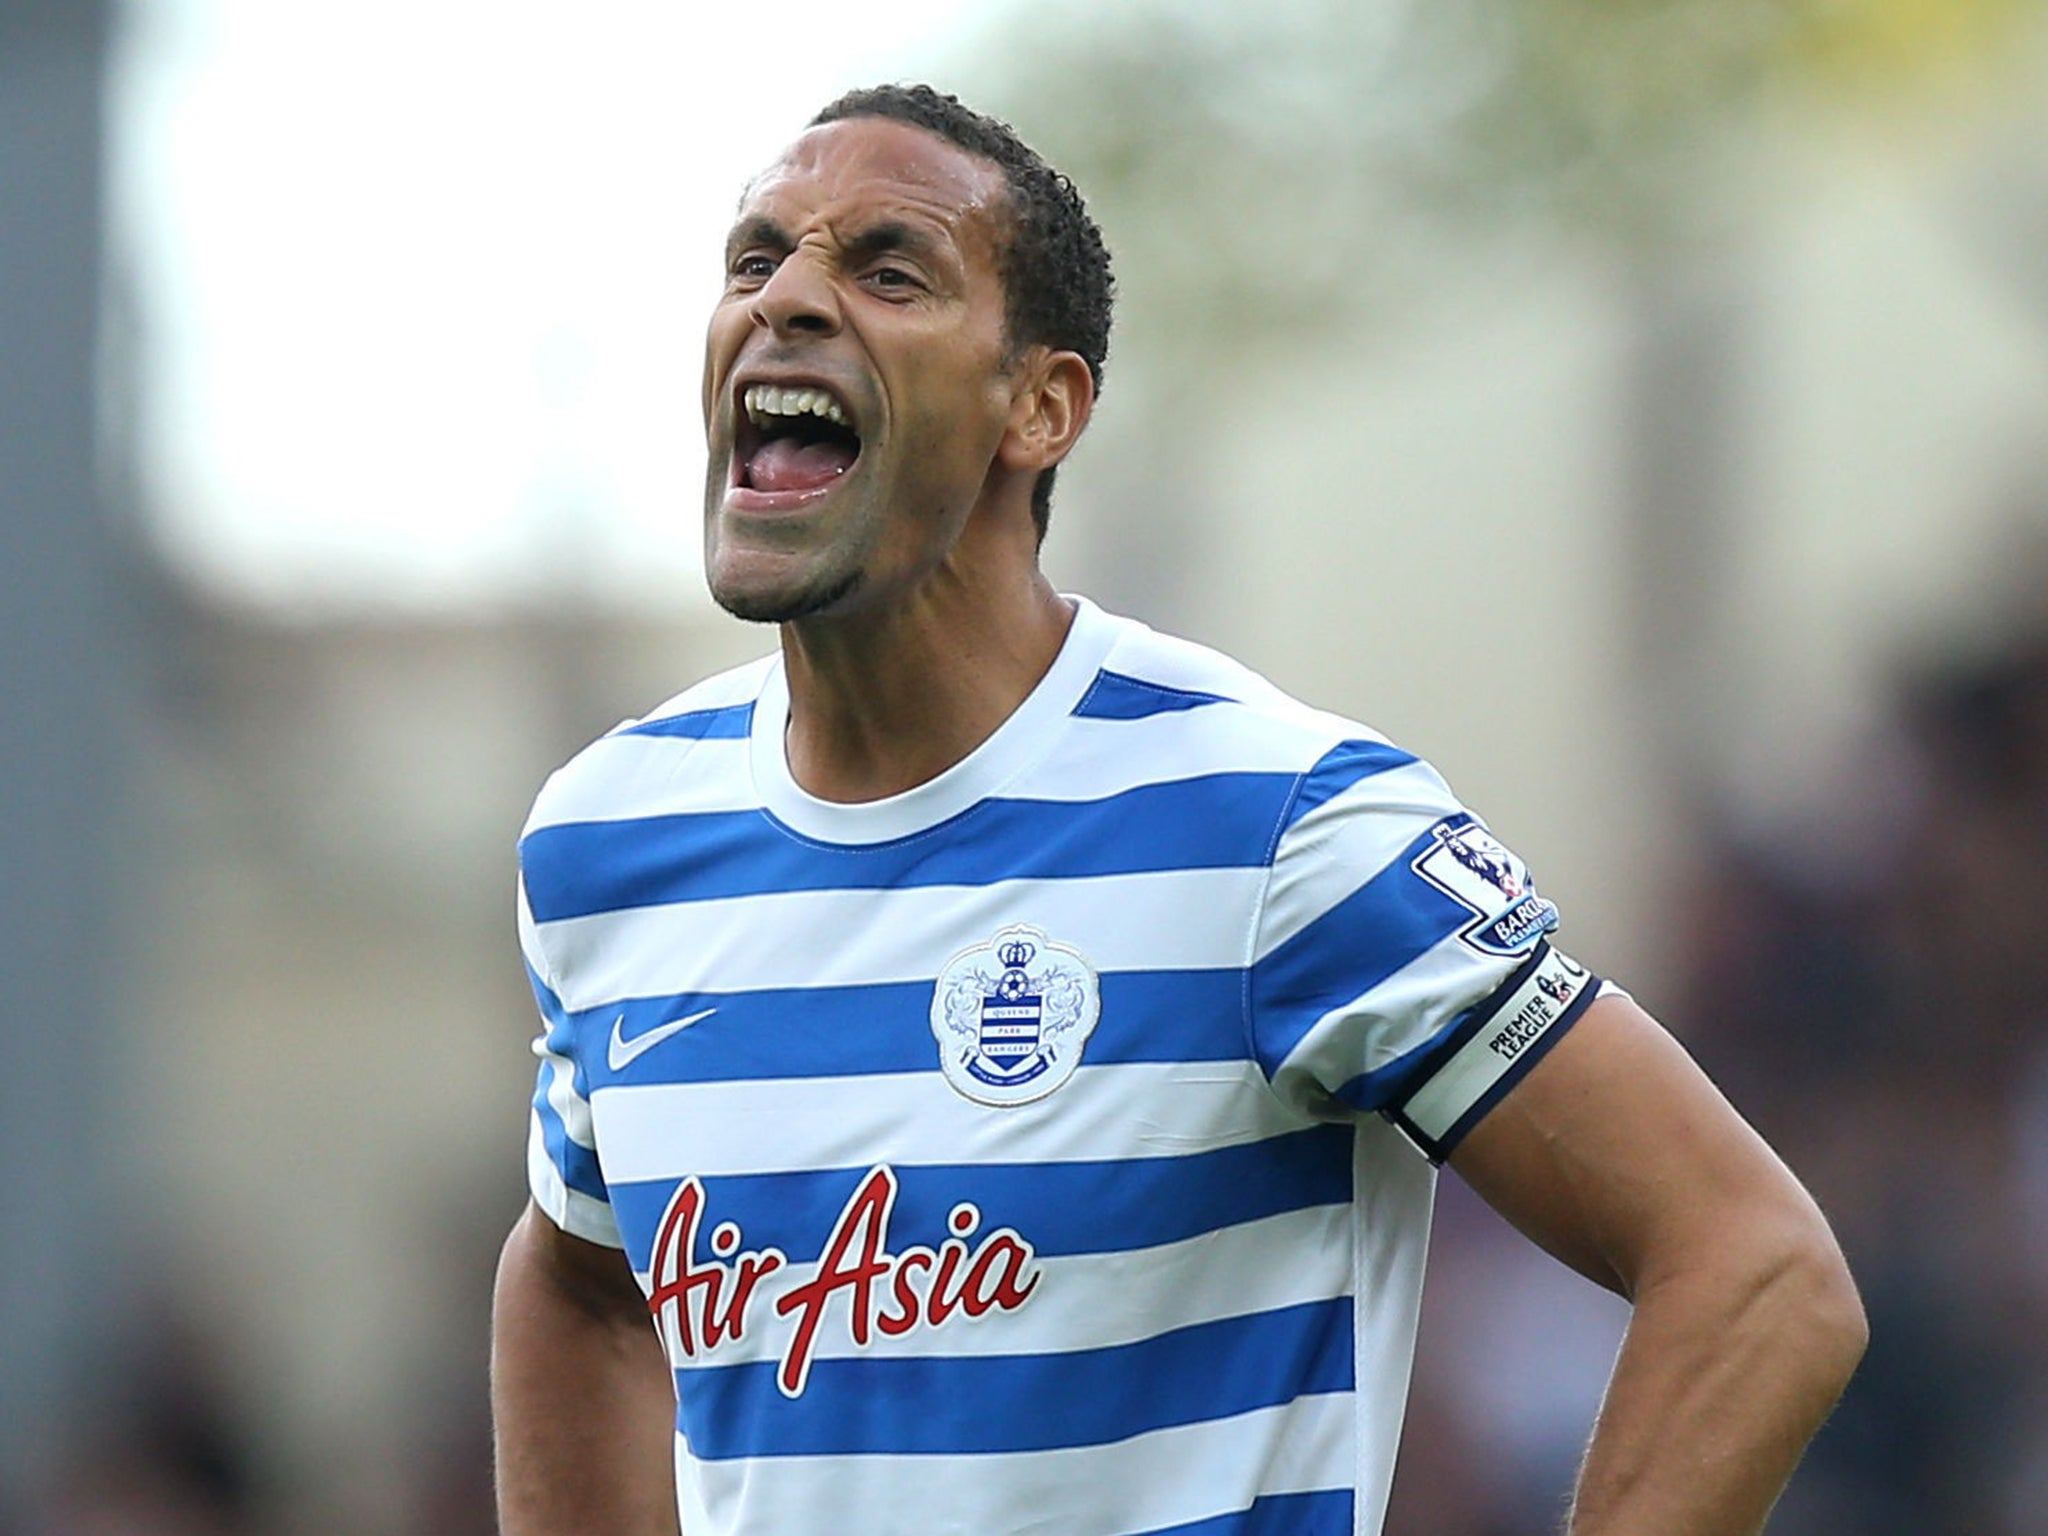 QPR defender Rio Ferdinand has been banned for three games and fined £25,000 for an abusive tweet